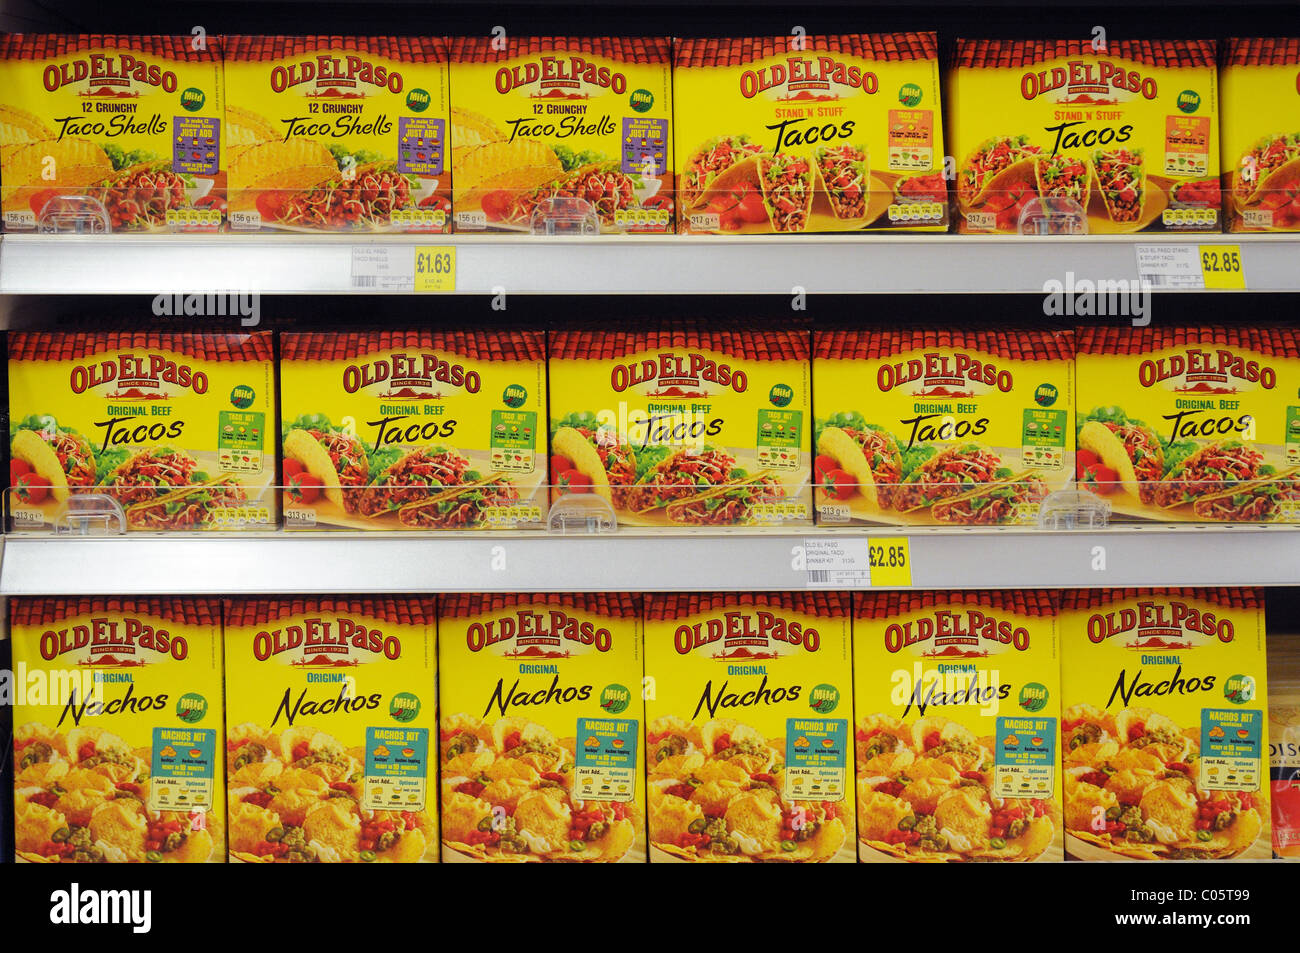 of Old El Paso Tacos on a shelf in a supermarket in England Stock Photo - Alamy